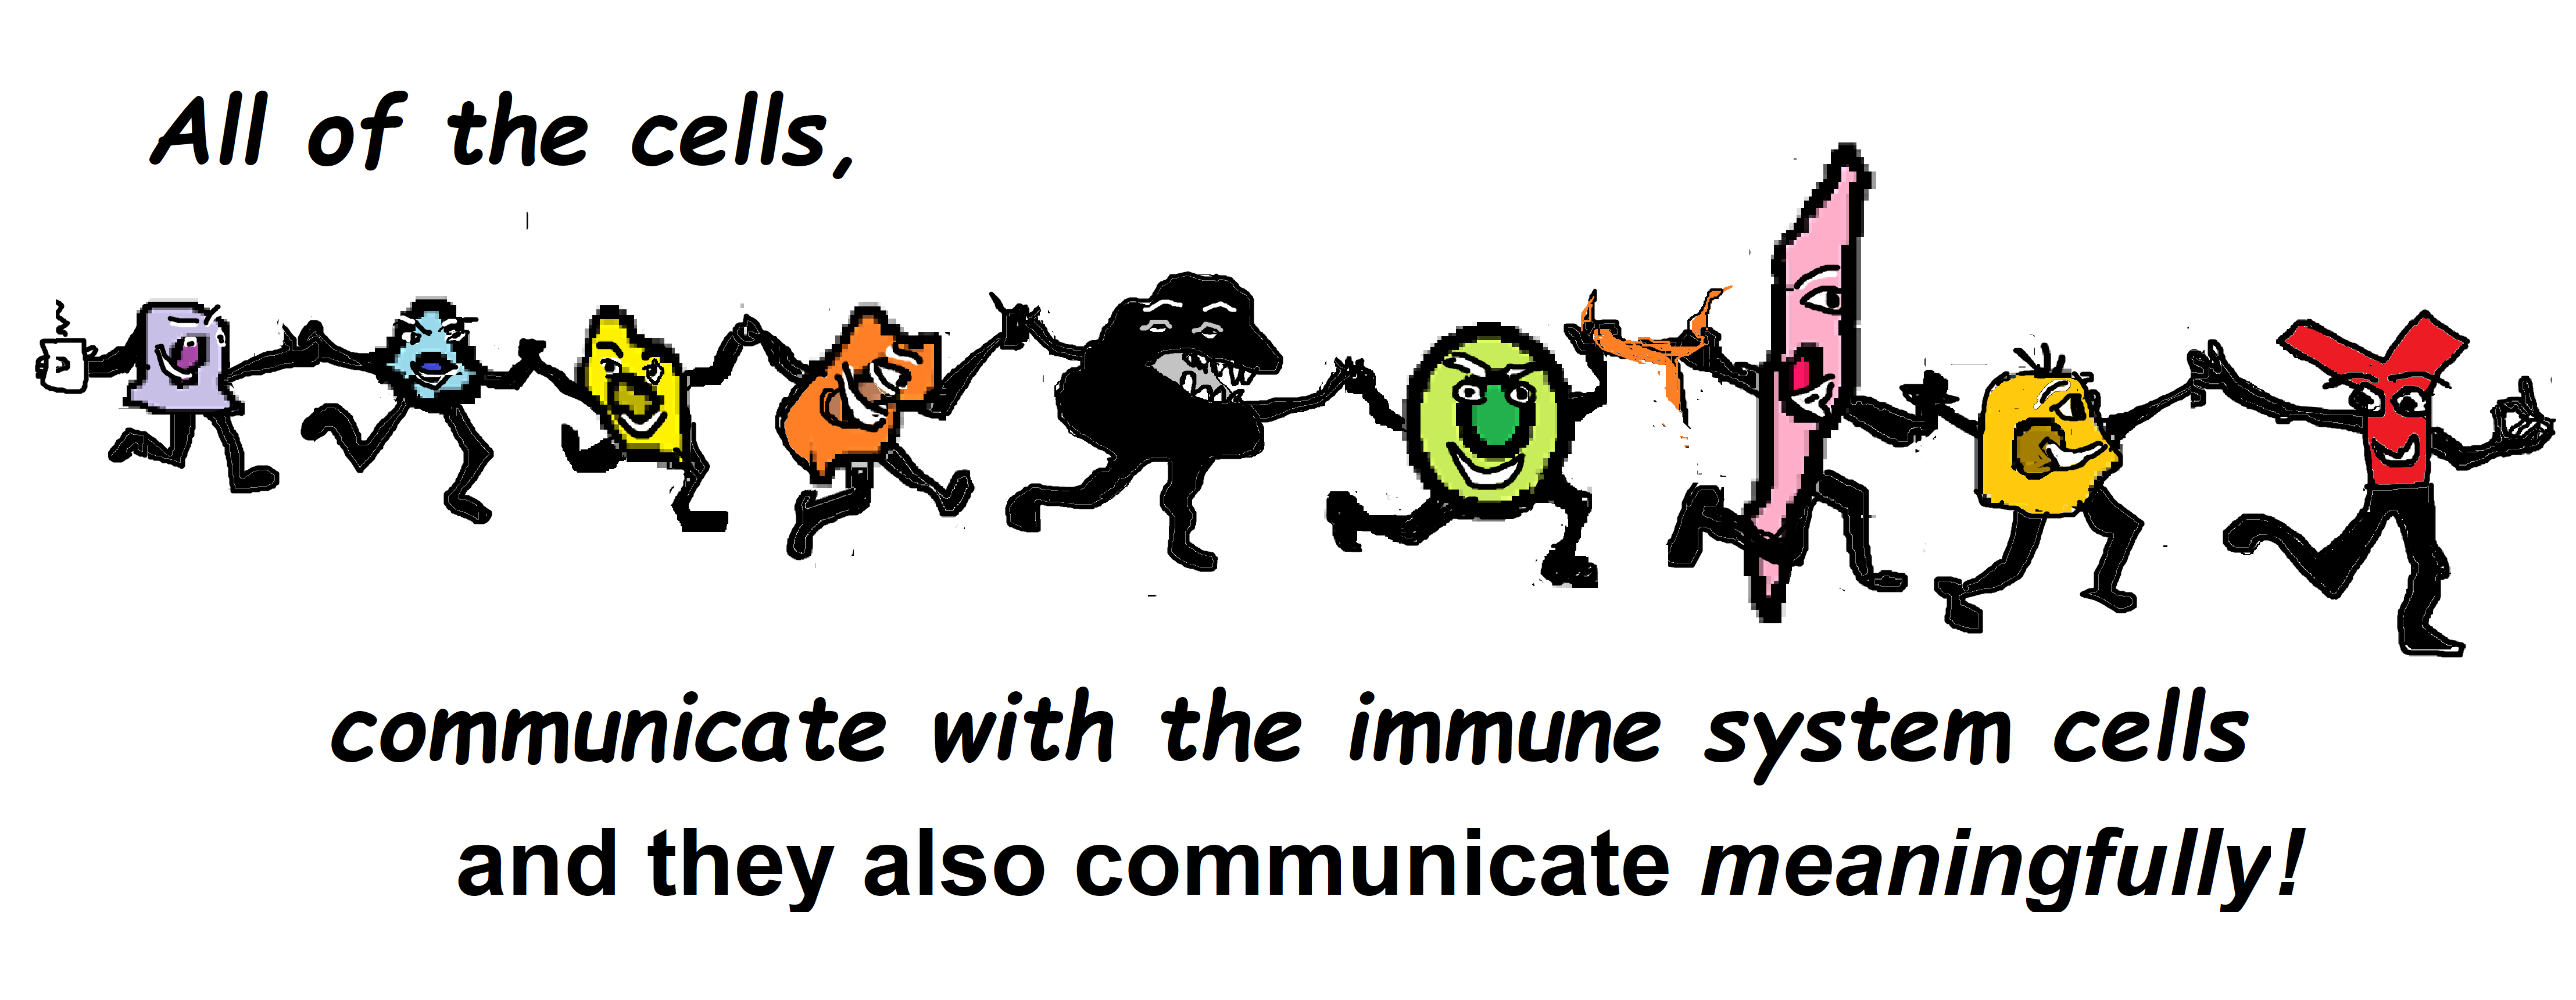 all cells communicate with each other meaningfully eith immune system cellsgfdghbcv